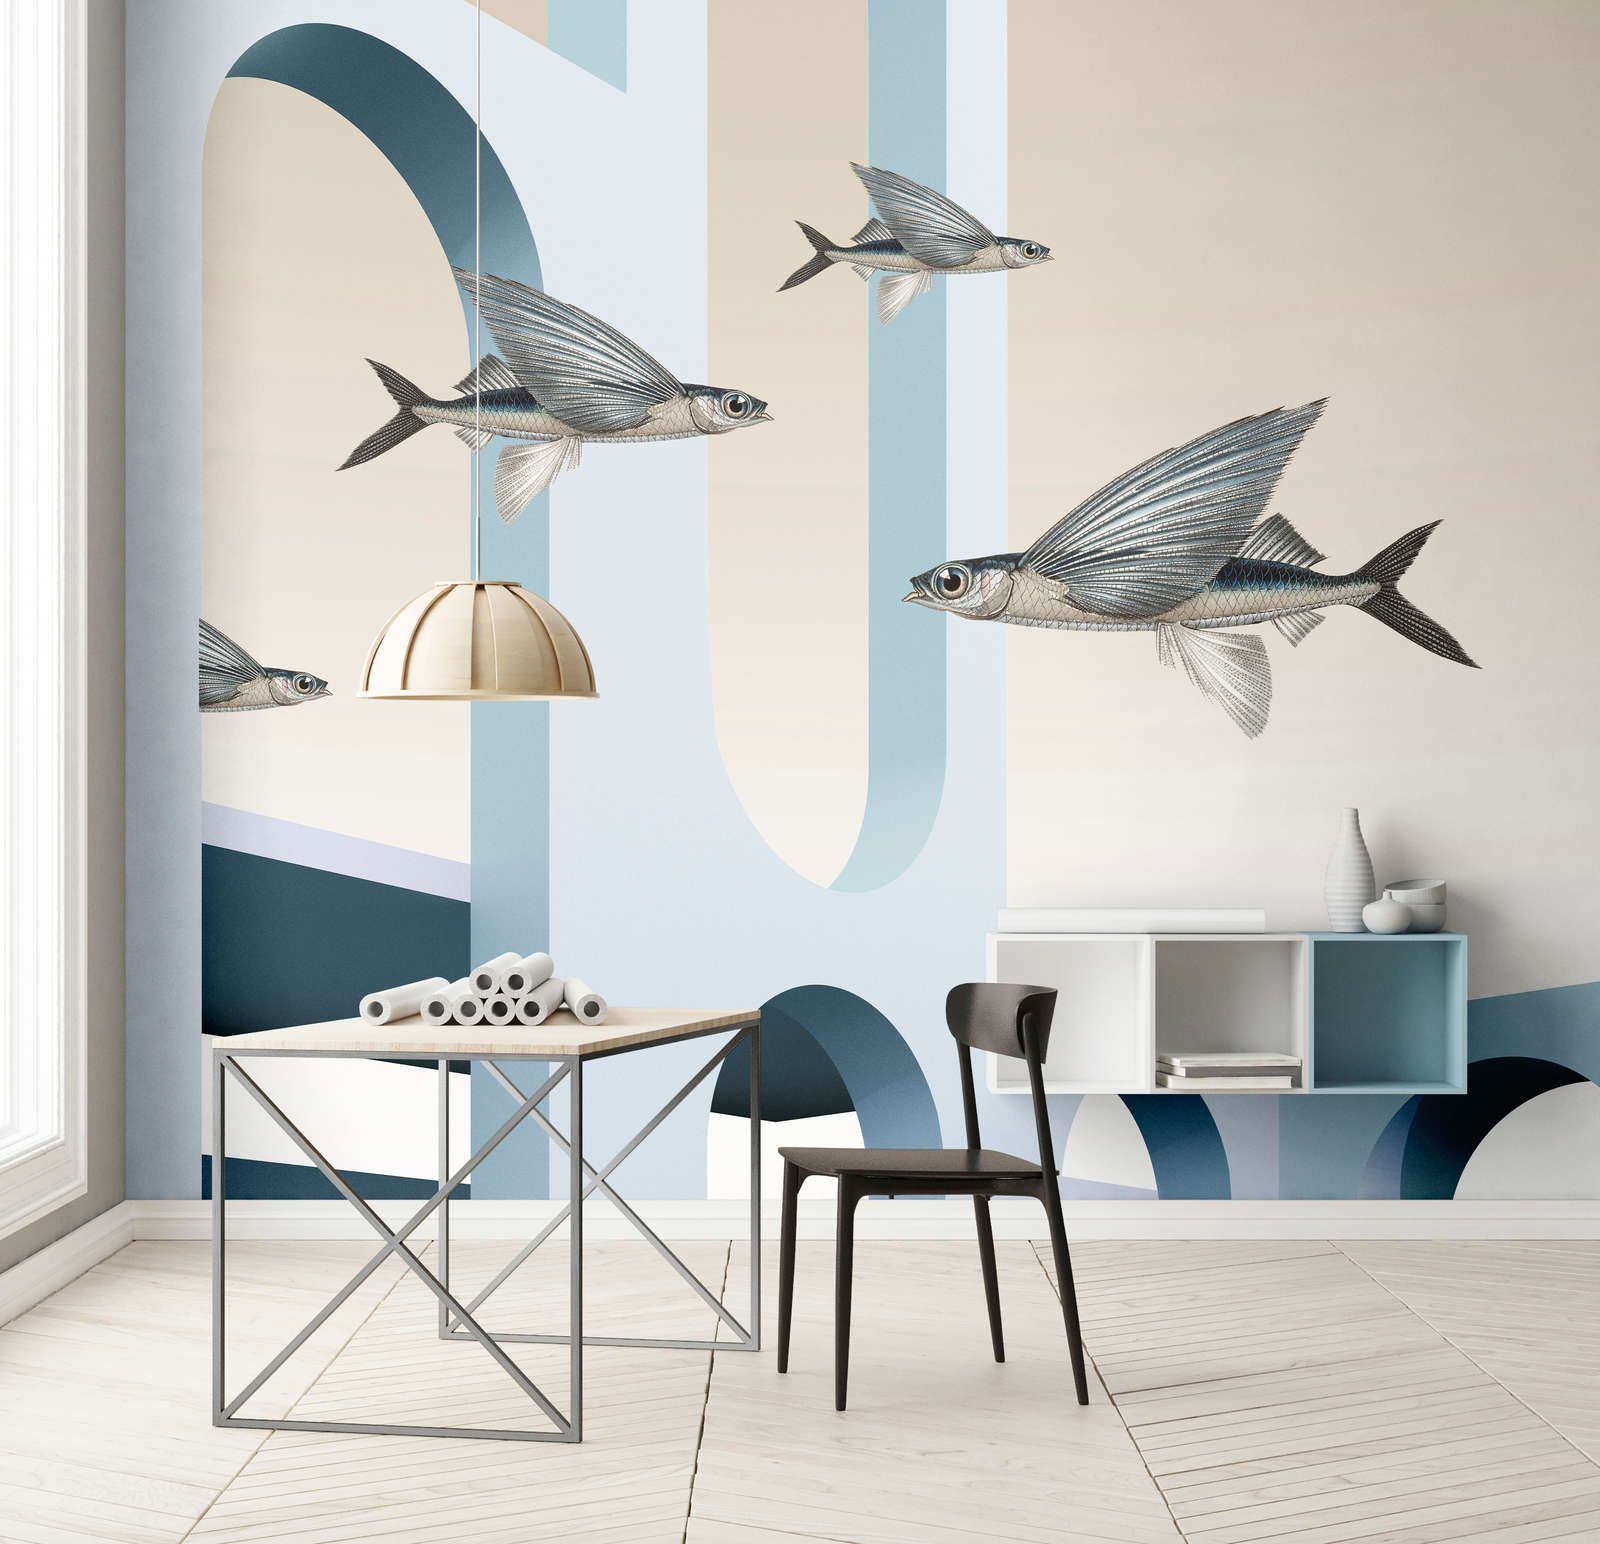             styx - Photo wallpaper with abstract 3D architecture and flying fish - Smooth, slightly shiny premium non-woven fabric
        